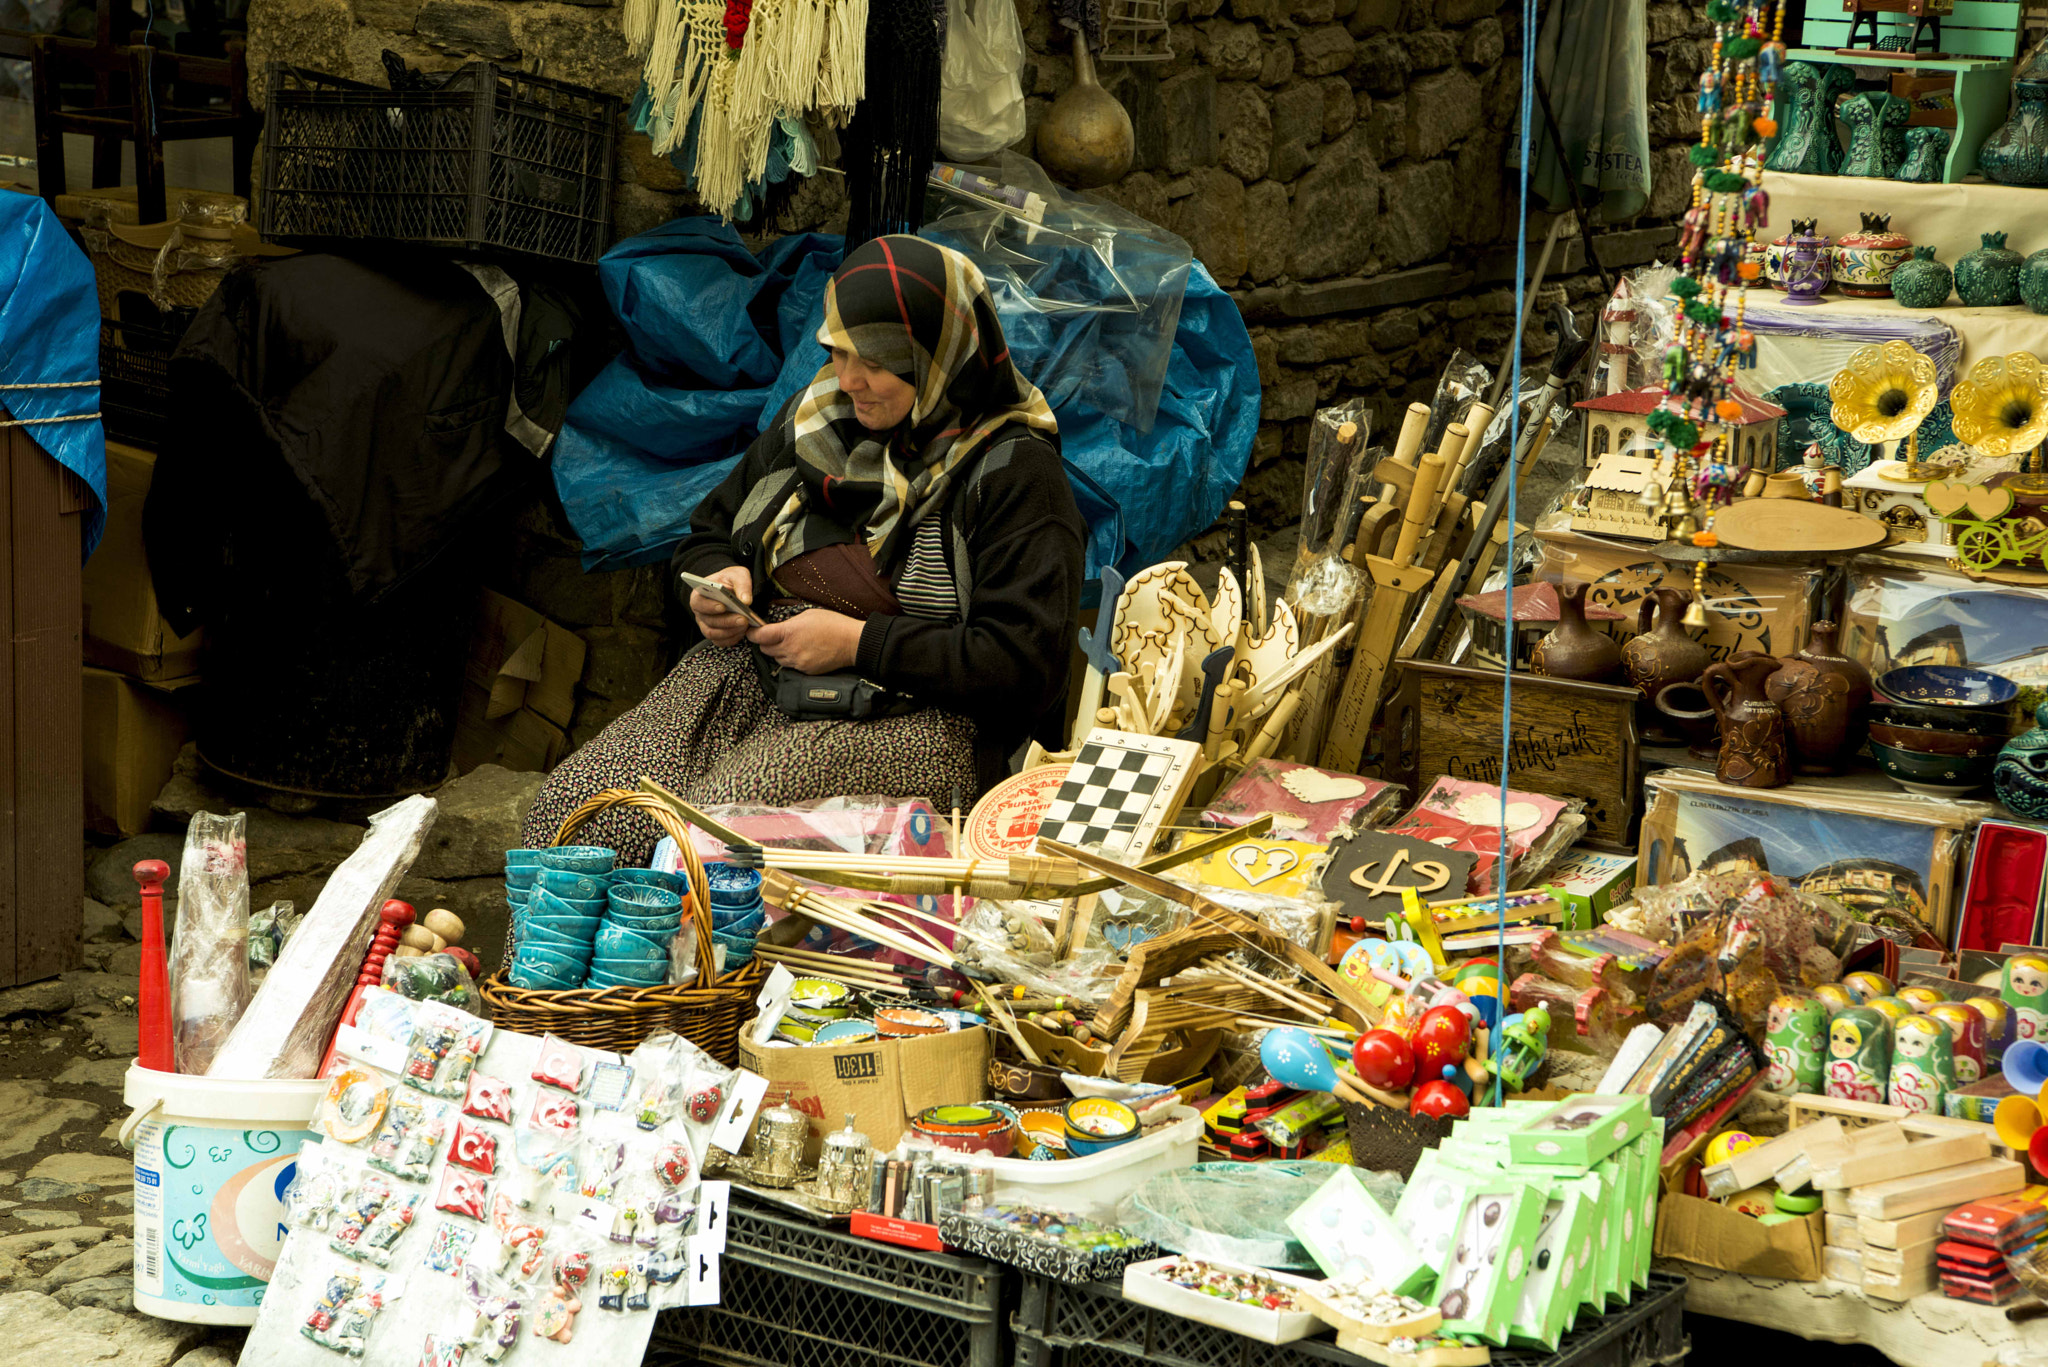 Nikon D810 sample photo. A steert vendor woman taking a look on her mobile photography